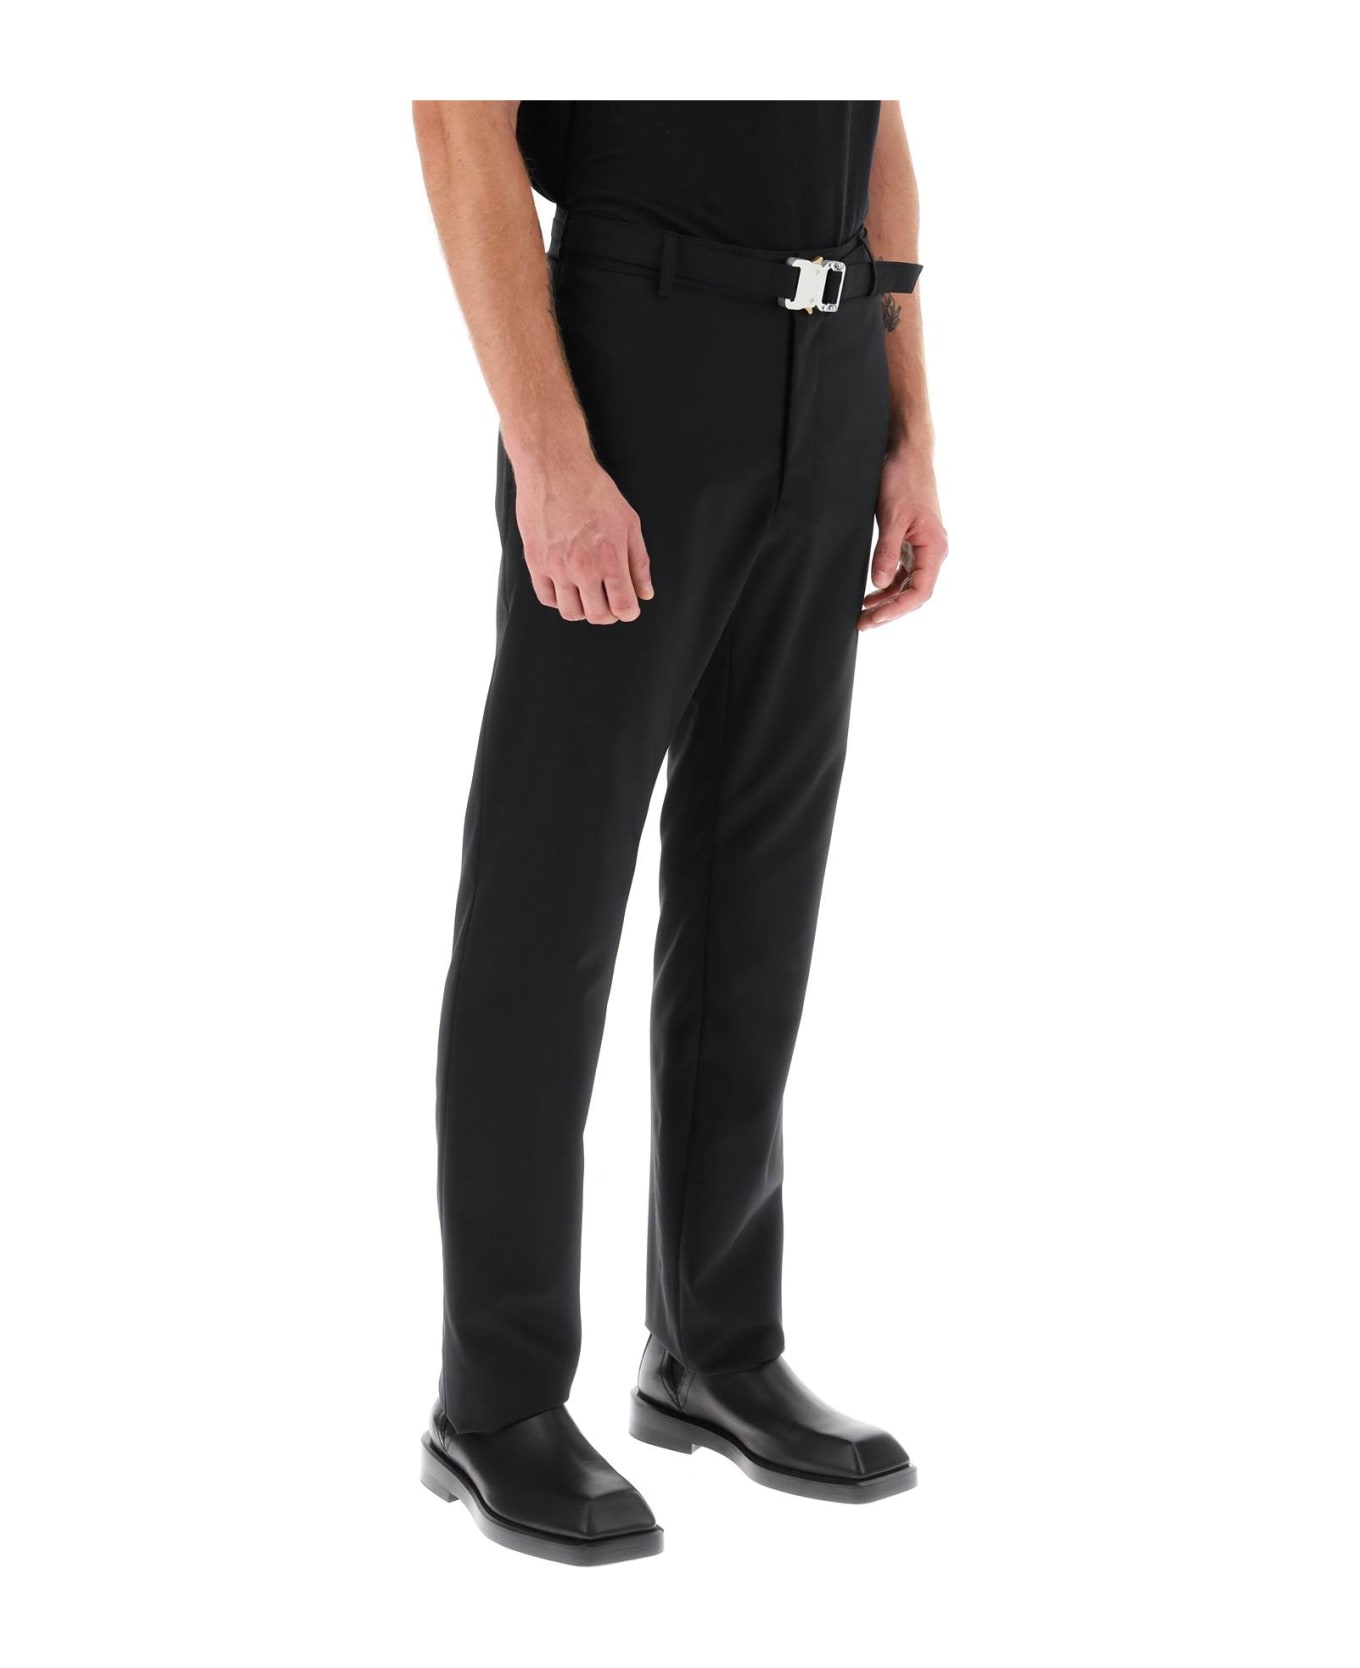 1017 ALYX 9SM Pants With Built-in Belt And Parachute Buckle - BLACK (Black)